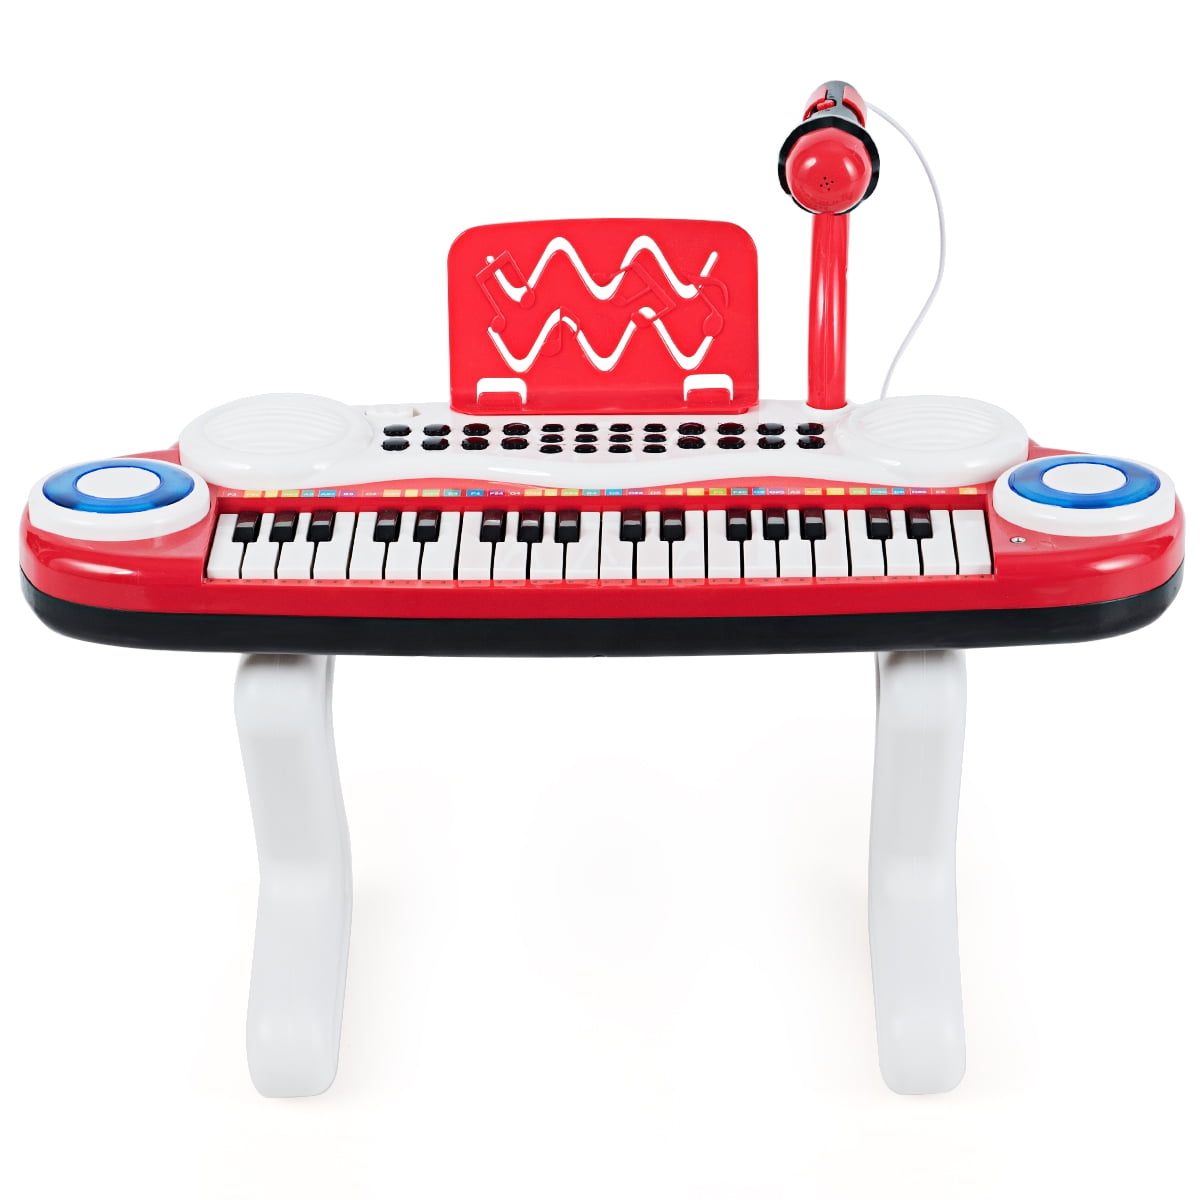 37-Key Toy Keyboard Piano Electronic Musical Instrument w/Music Score&Microphone 